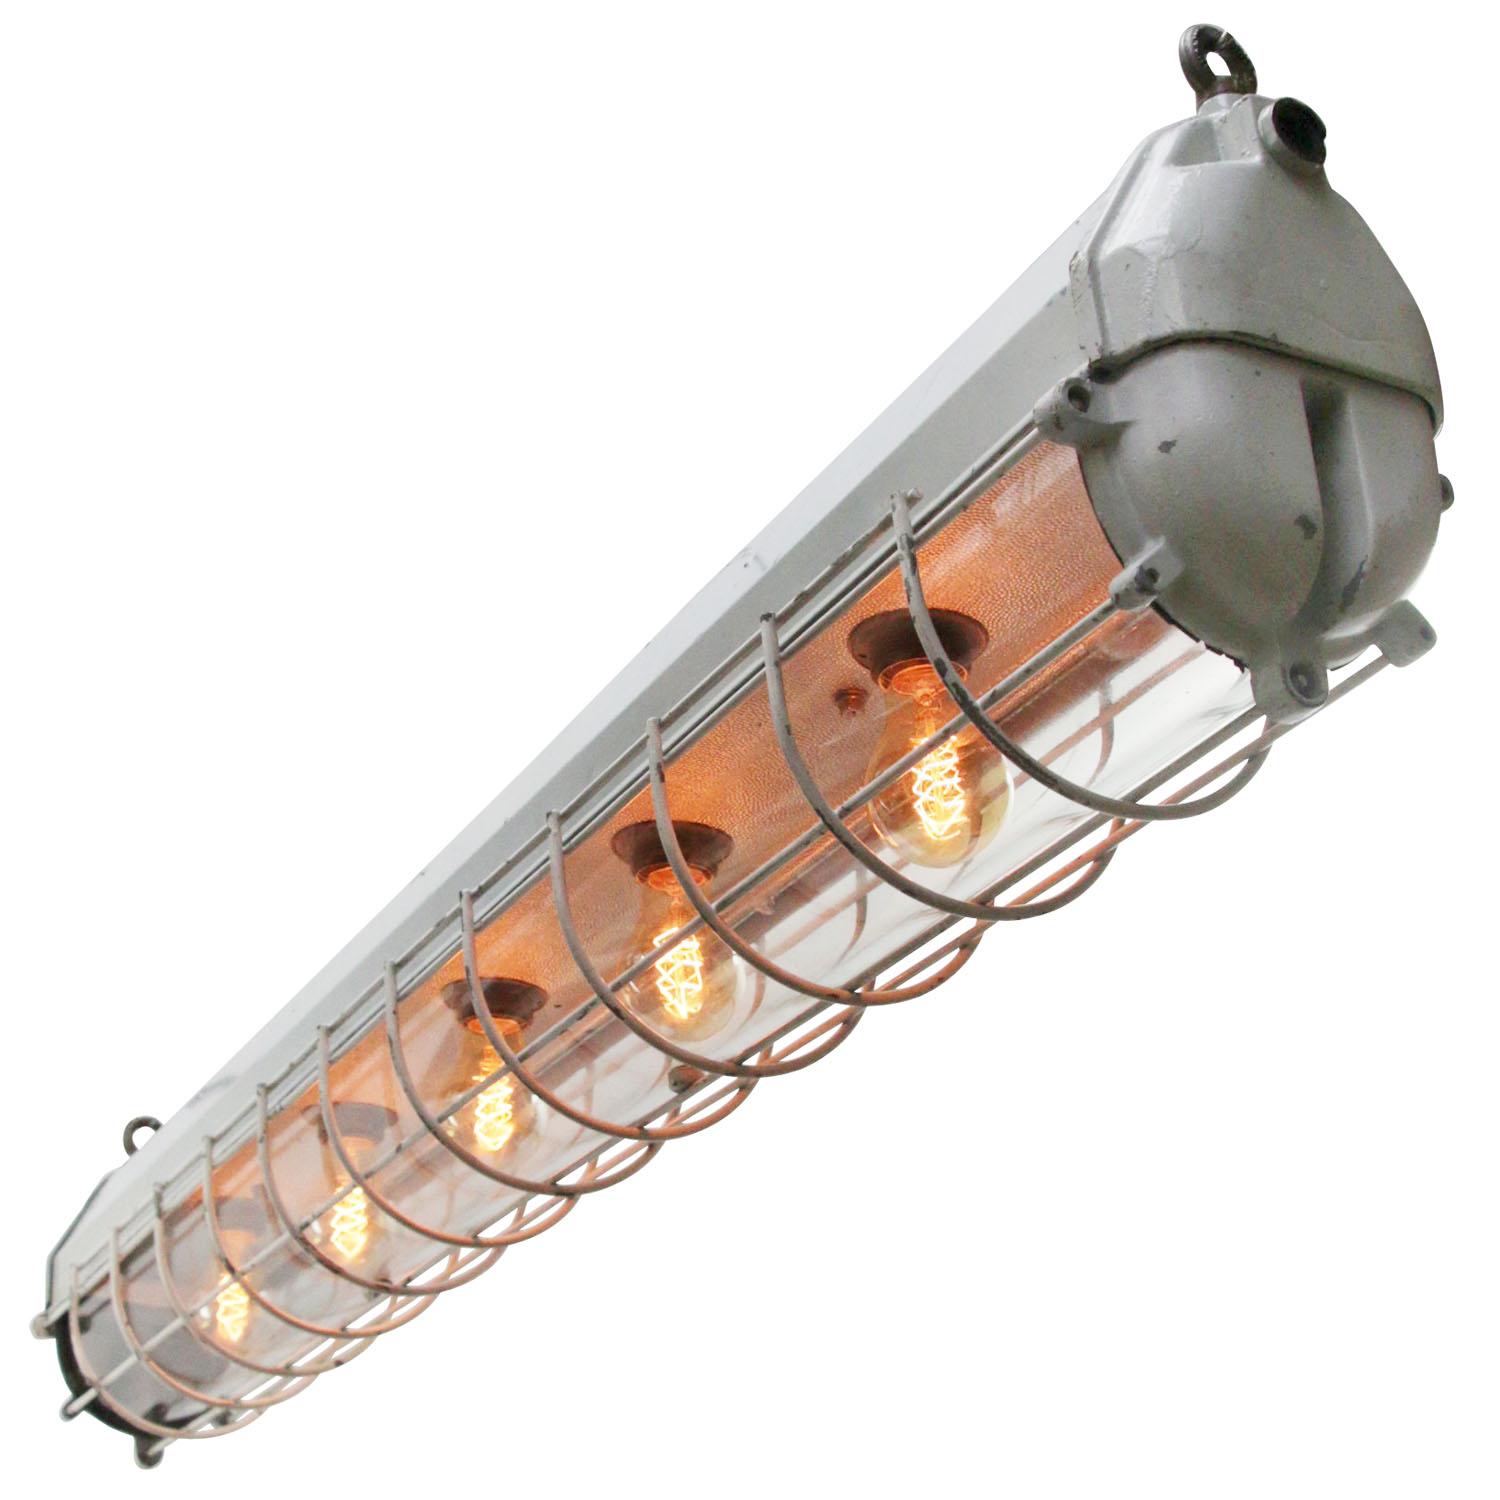 Industrial metal light with clear glass

Suitable for 5-light bulbs E27/ E26

Weight: 17.20 kg / 37.9 lb

Priced per individual item. All lamps have been made suitable by international standards for incandescent light bulbs, energy-efficient